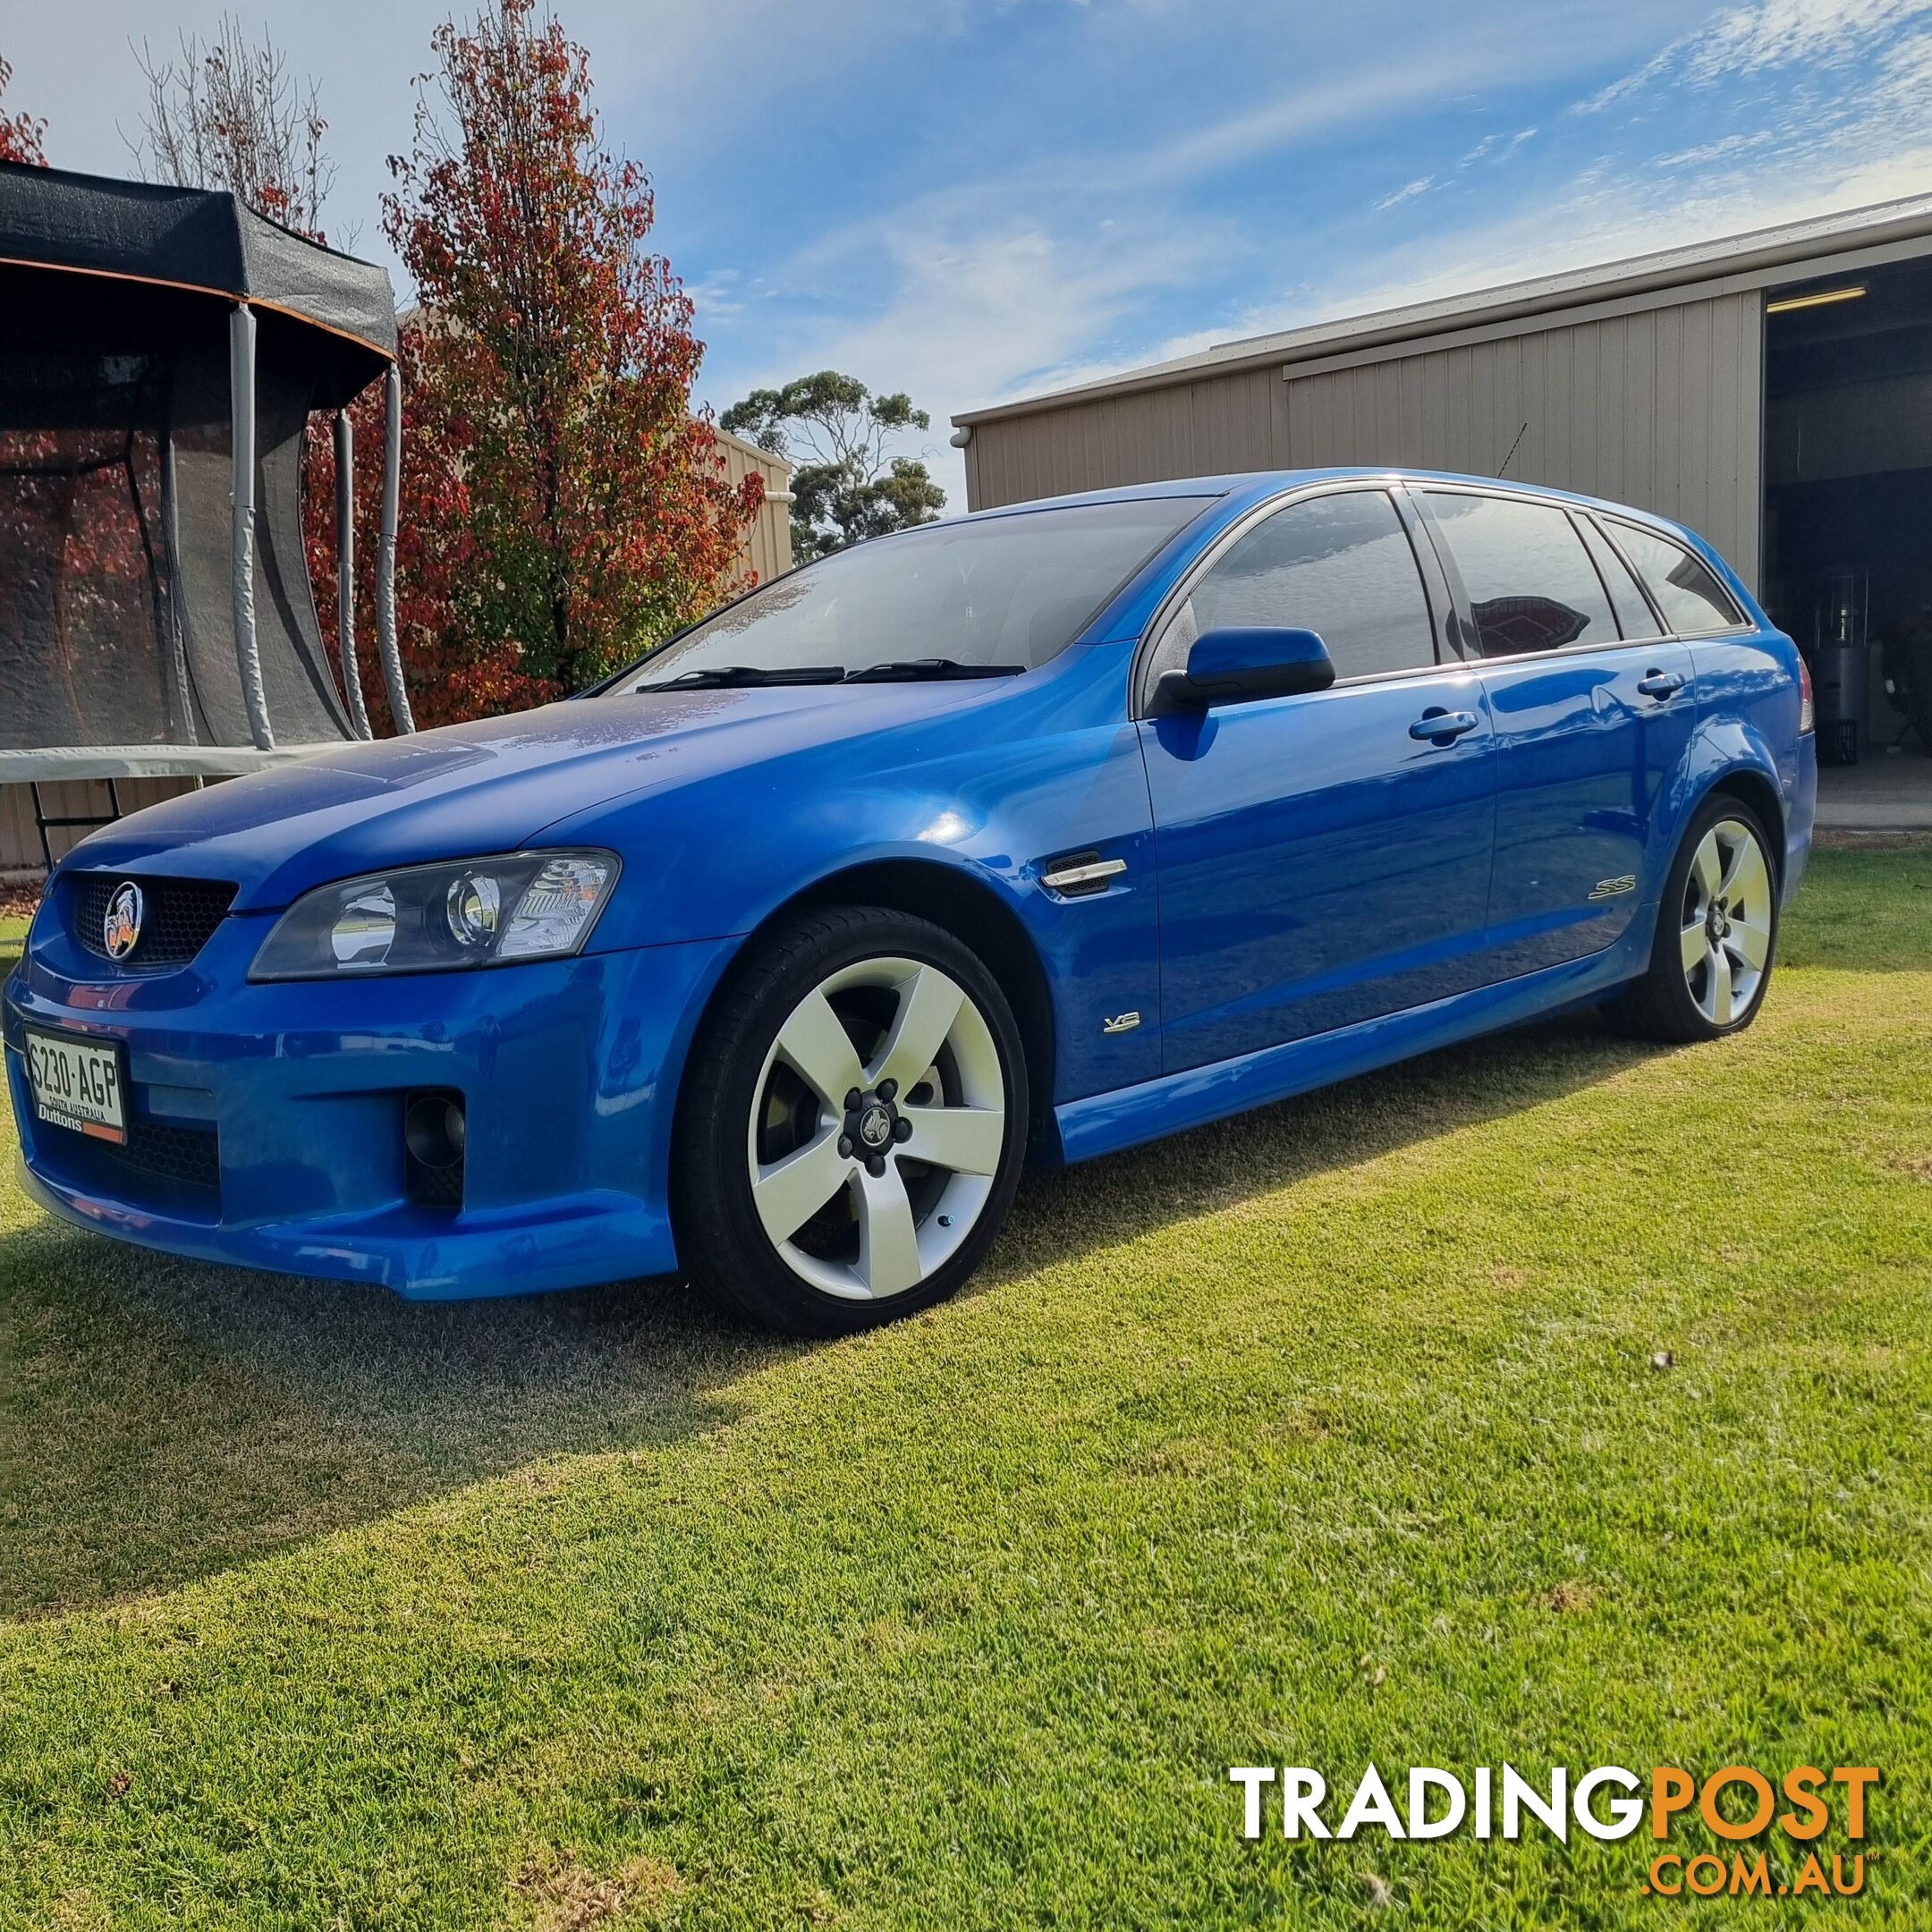 2009 Holden Commodore VE MY10 SS Wagon Manual